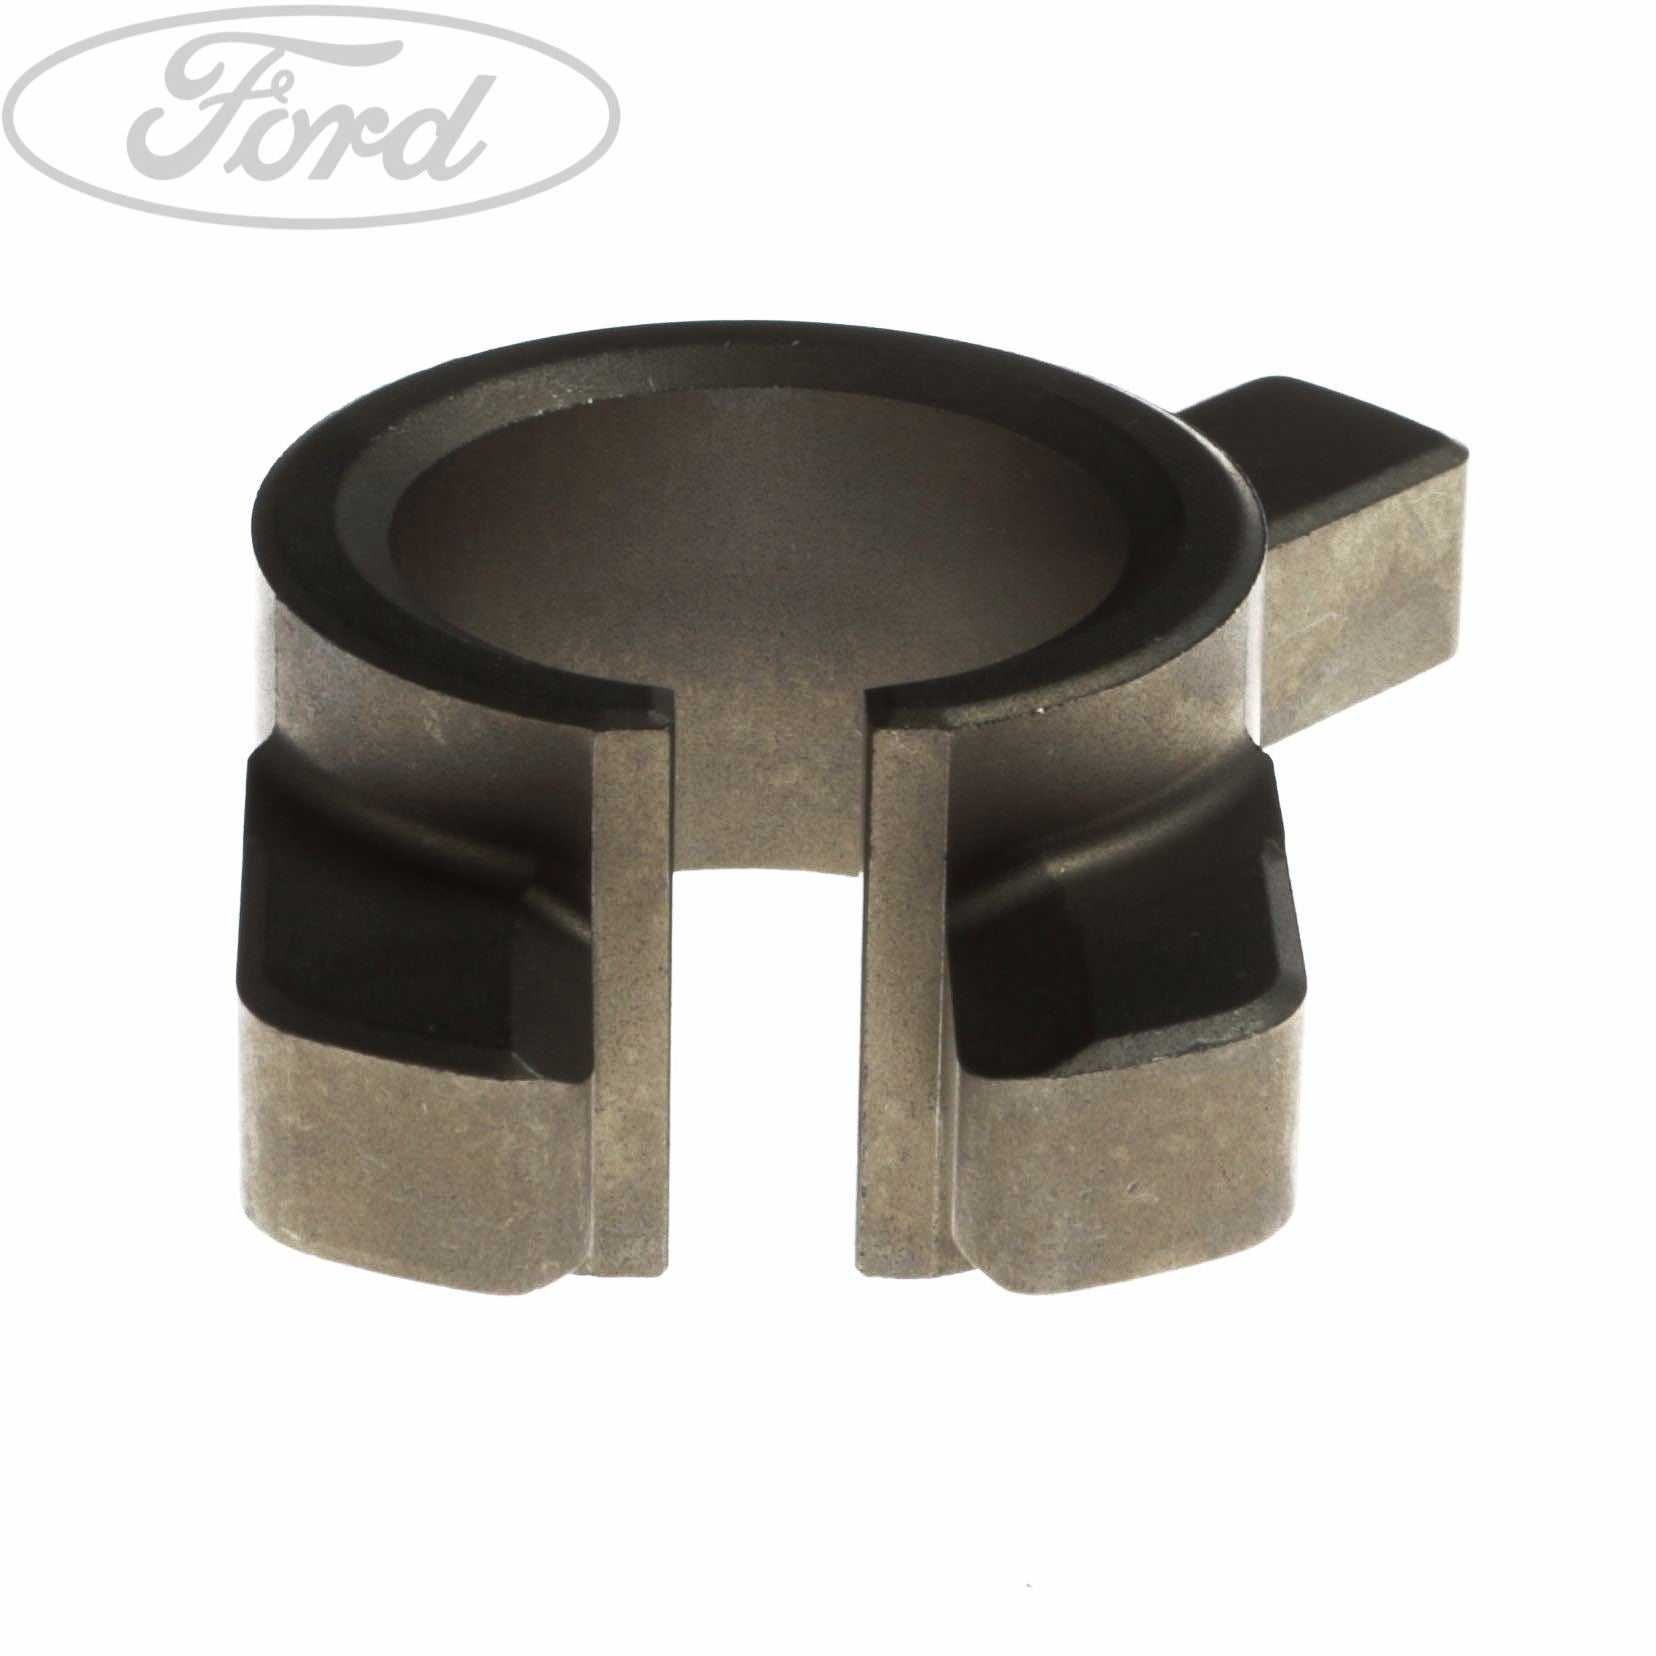 Ford, TRANSMISSION SELECTOR ARM SLEEVE